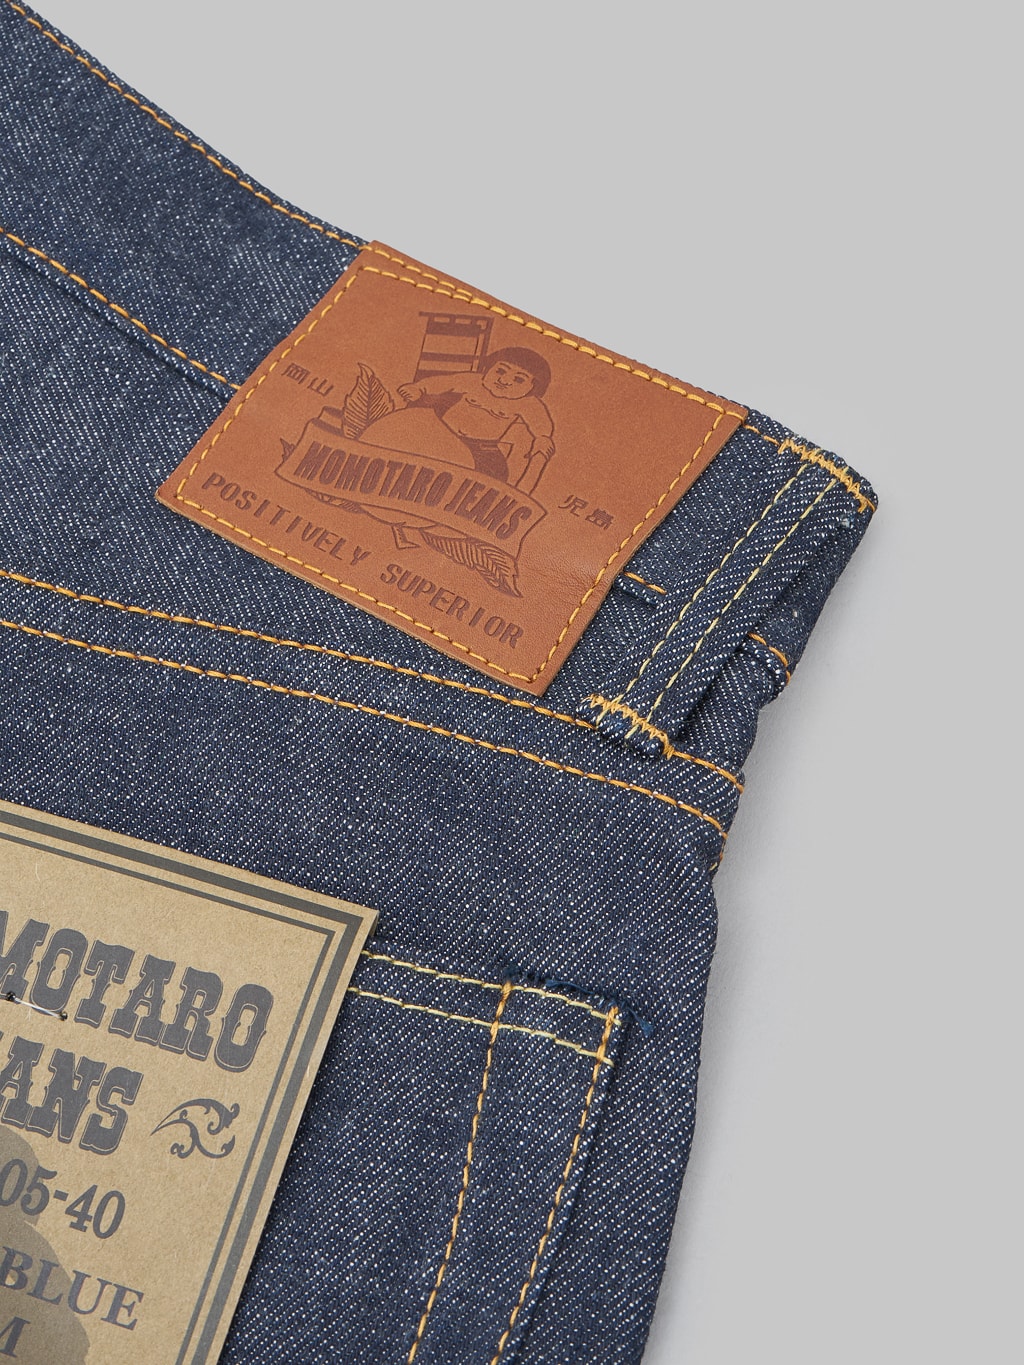 Momotaro legacy blue high tapered jeans brand leather patch